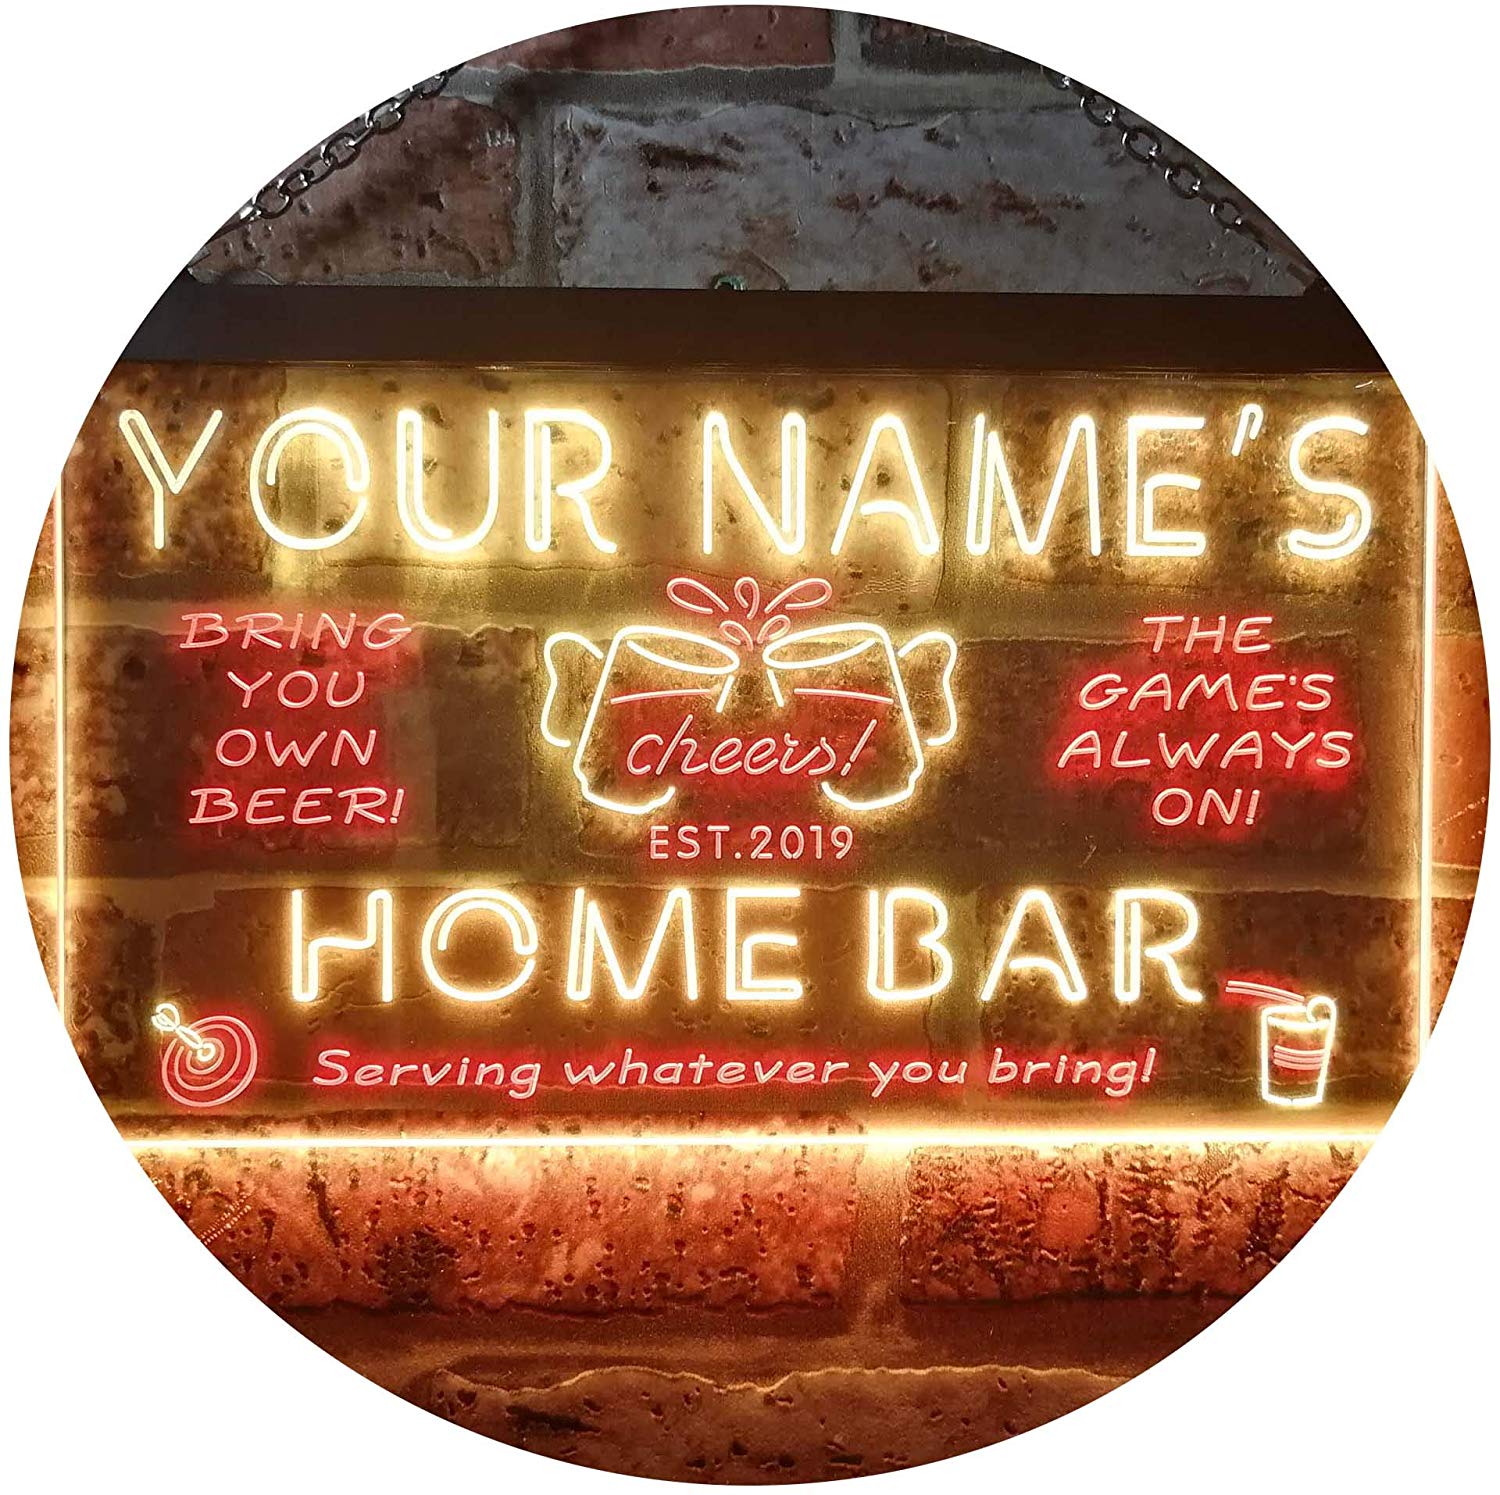 Custom Beer Cheers Home Bar LED Neon Light Sign - Way Up Gifts